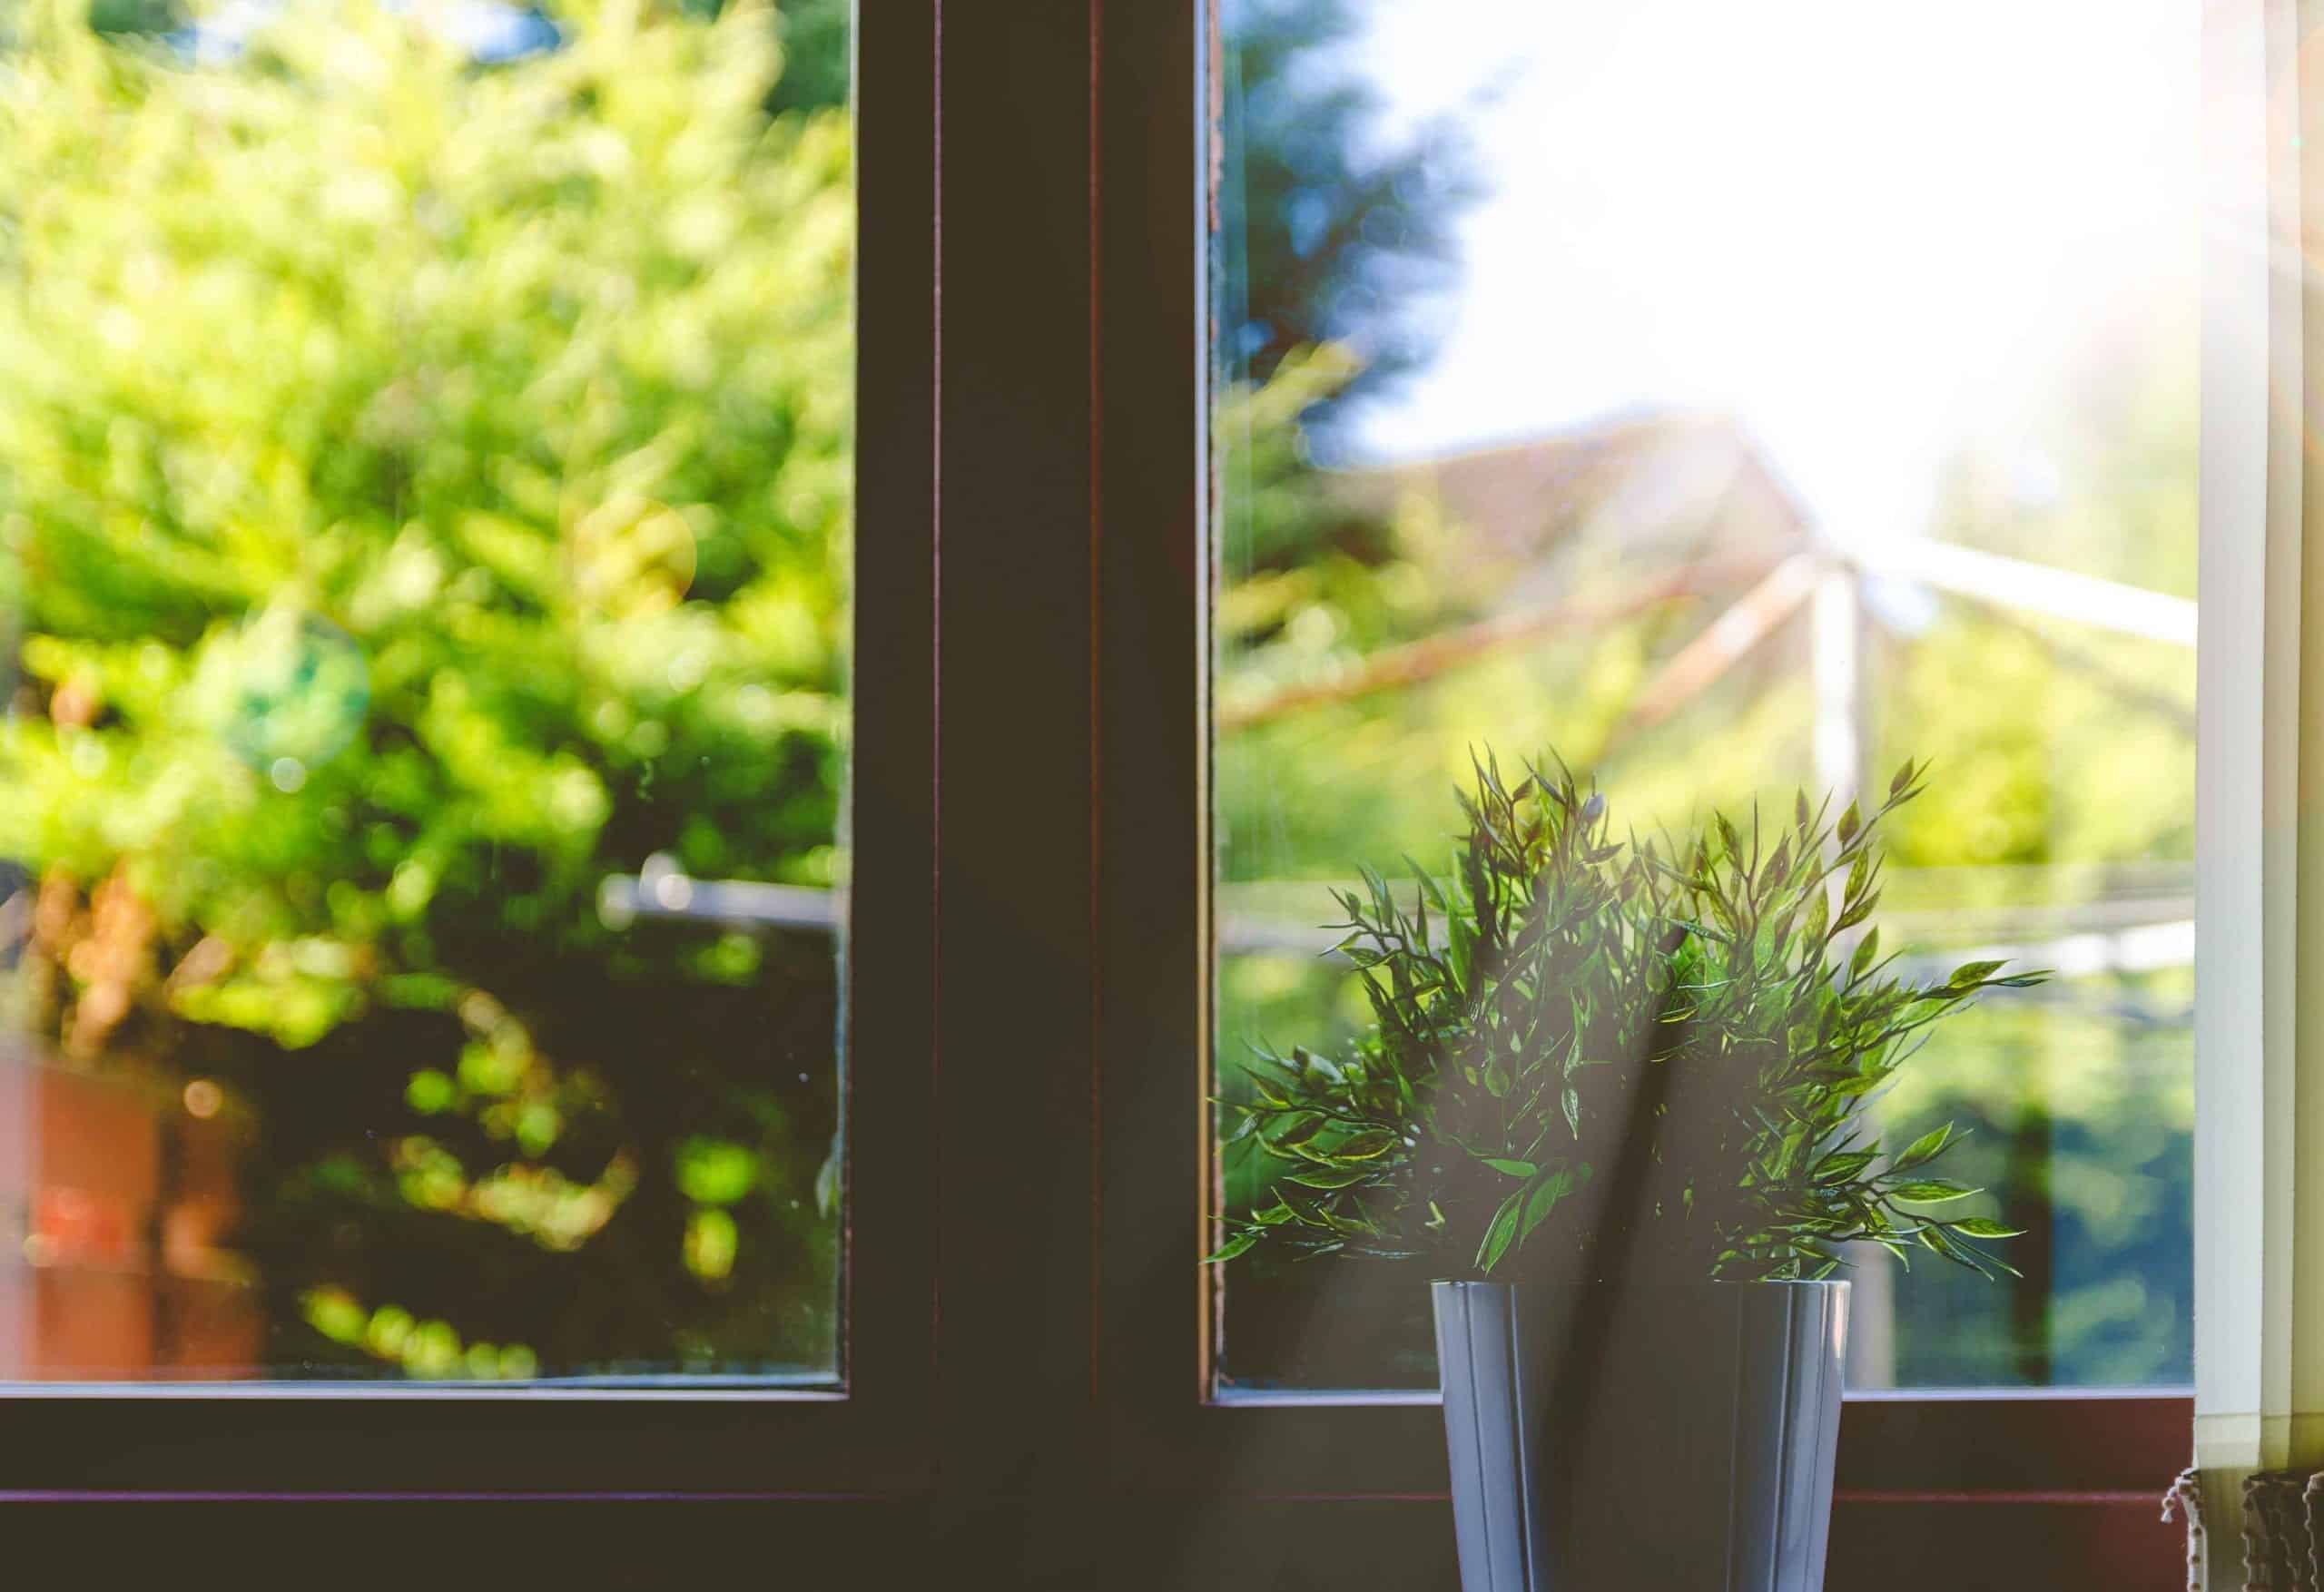 closed window in a home with a small plant in front of it, sun shining through